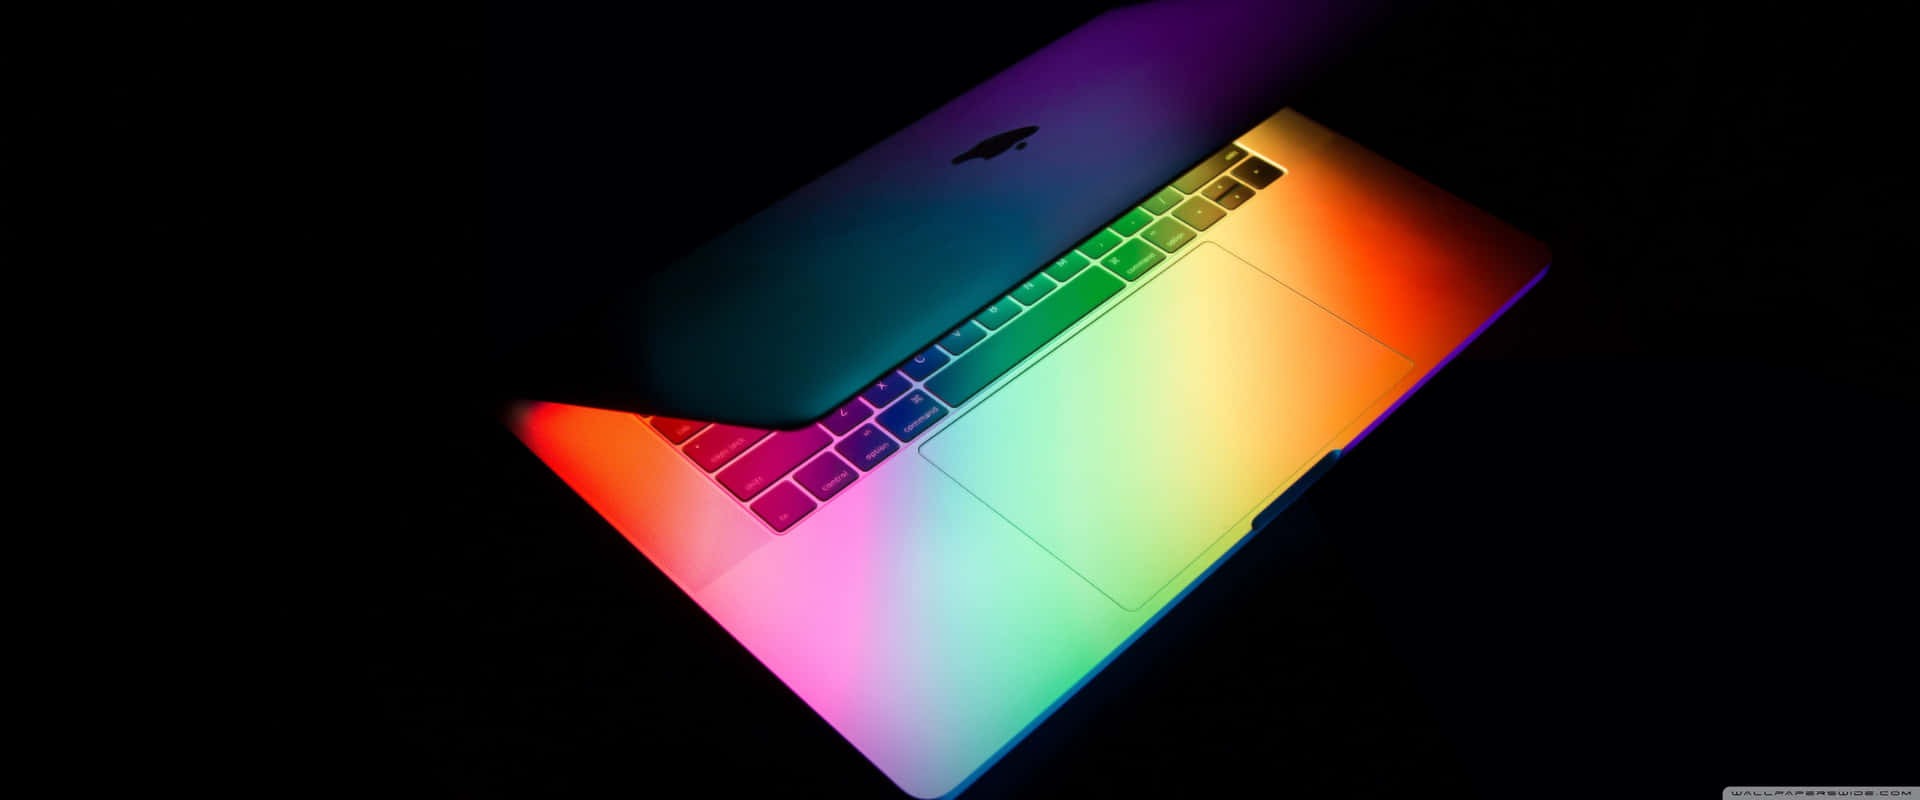 A Rainbow Colored Macbook Pro Is Shown In The Dark Wallpaper